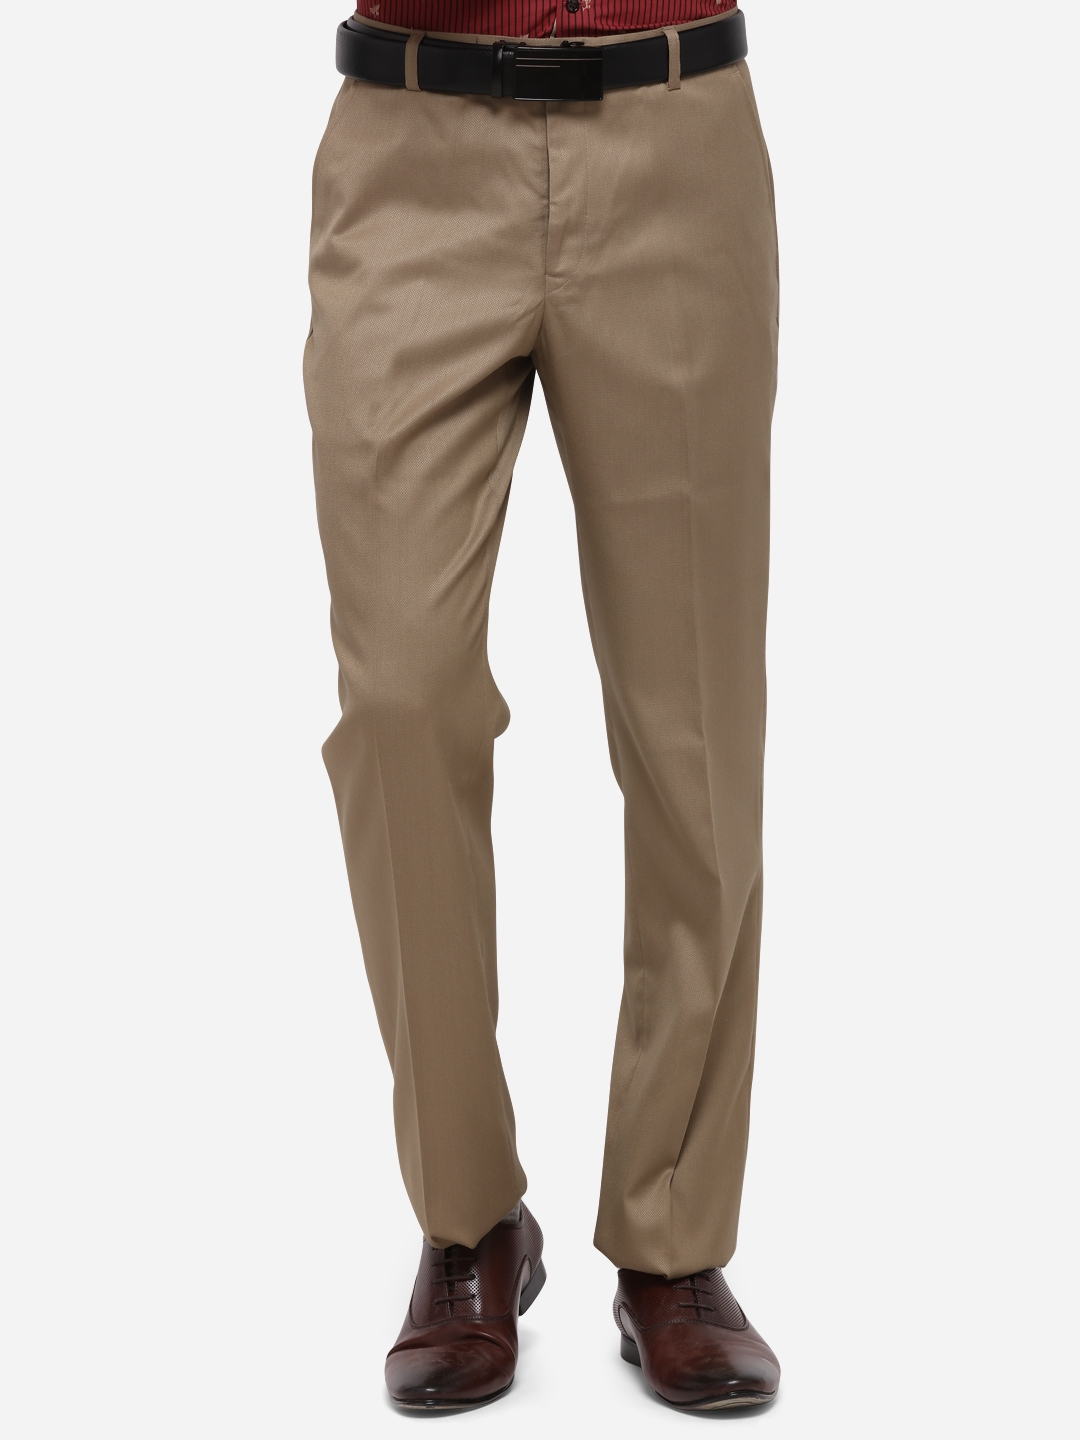 Buy WES Formals Solid Light Khaki Relaxed Fit Trousers from Westside